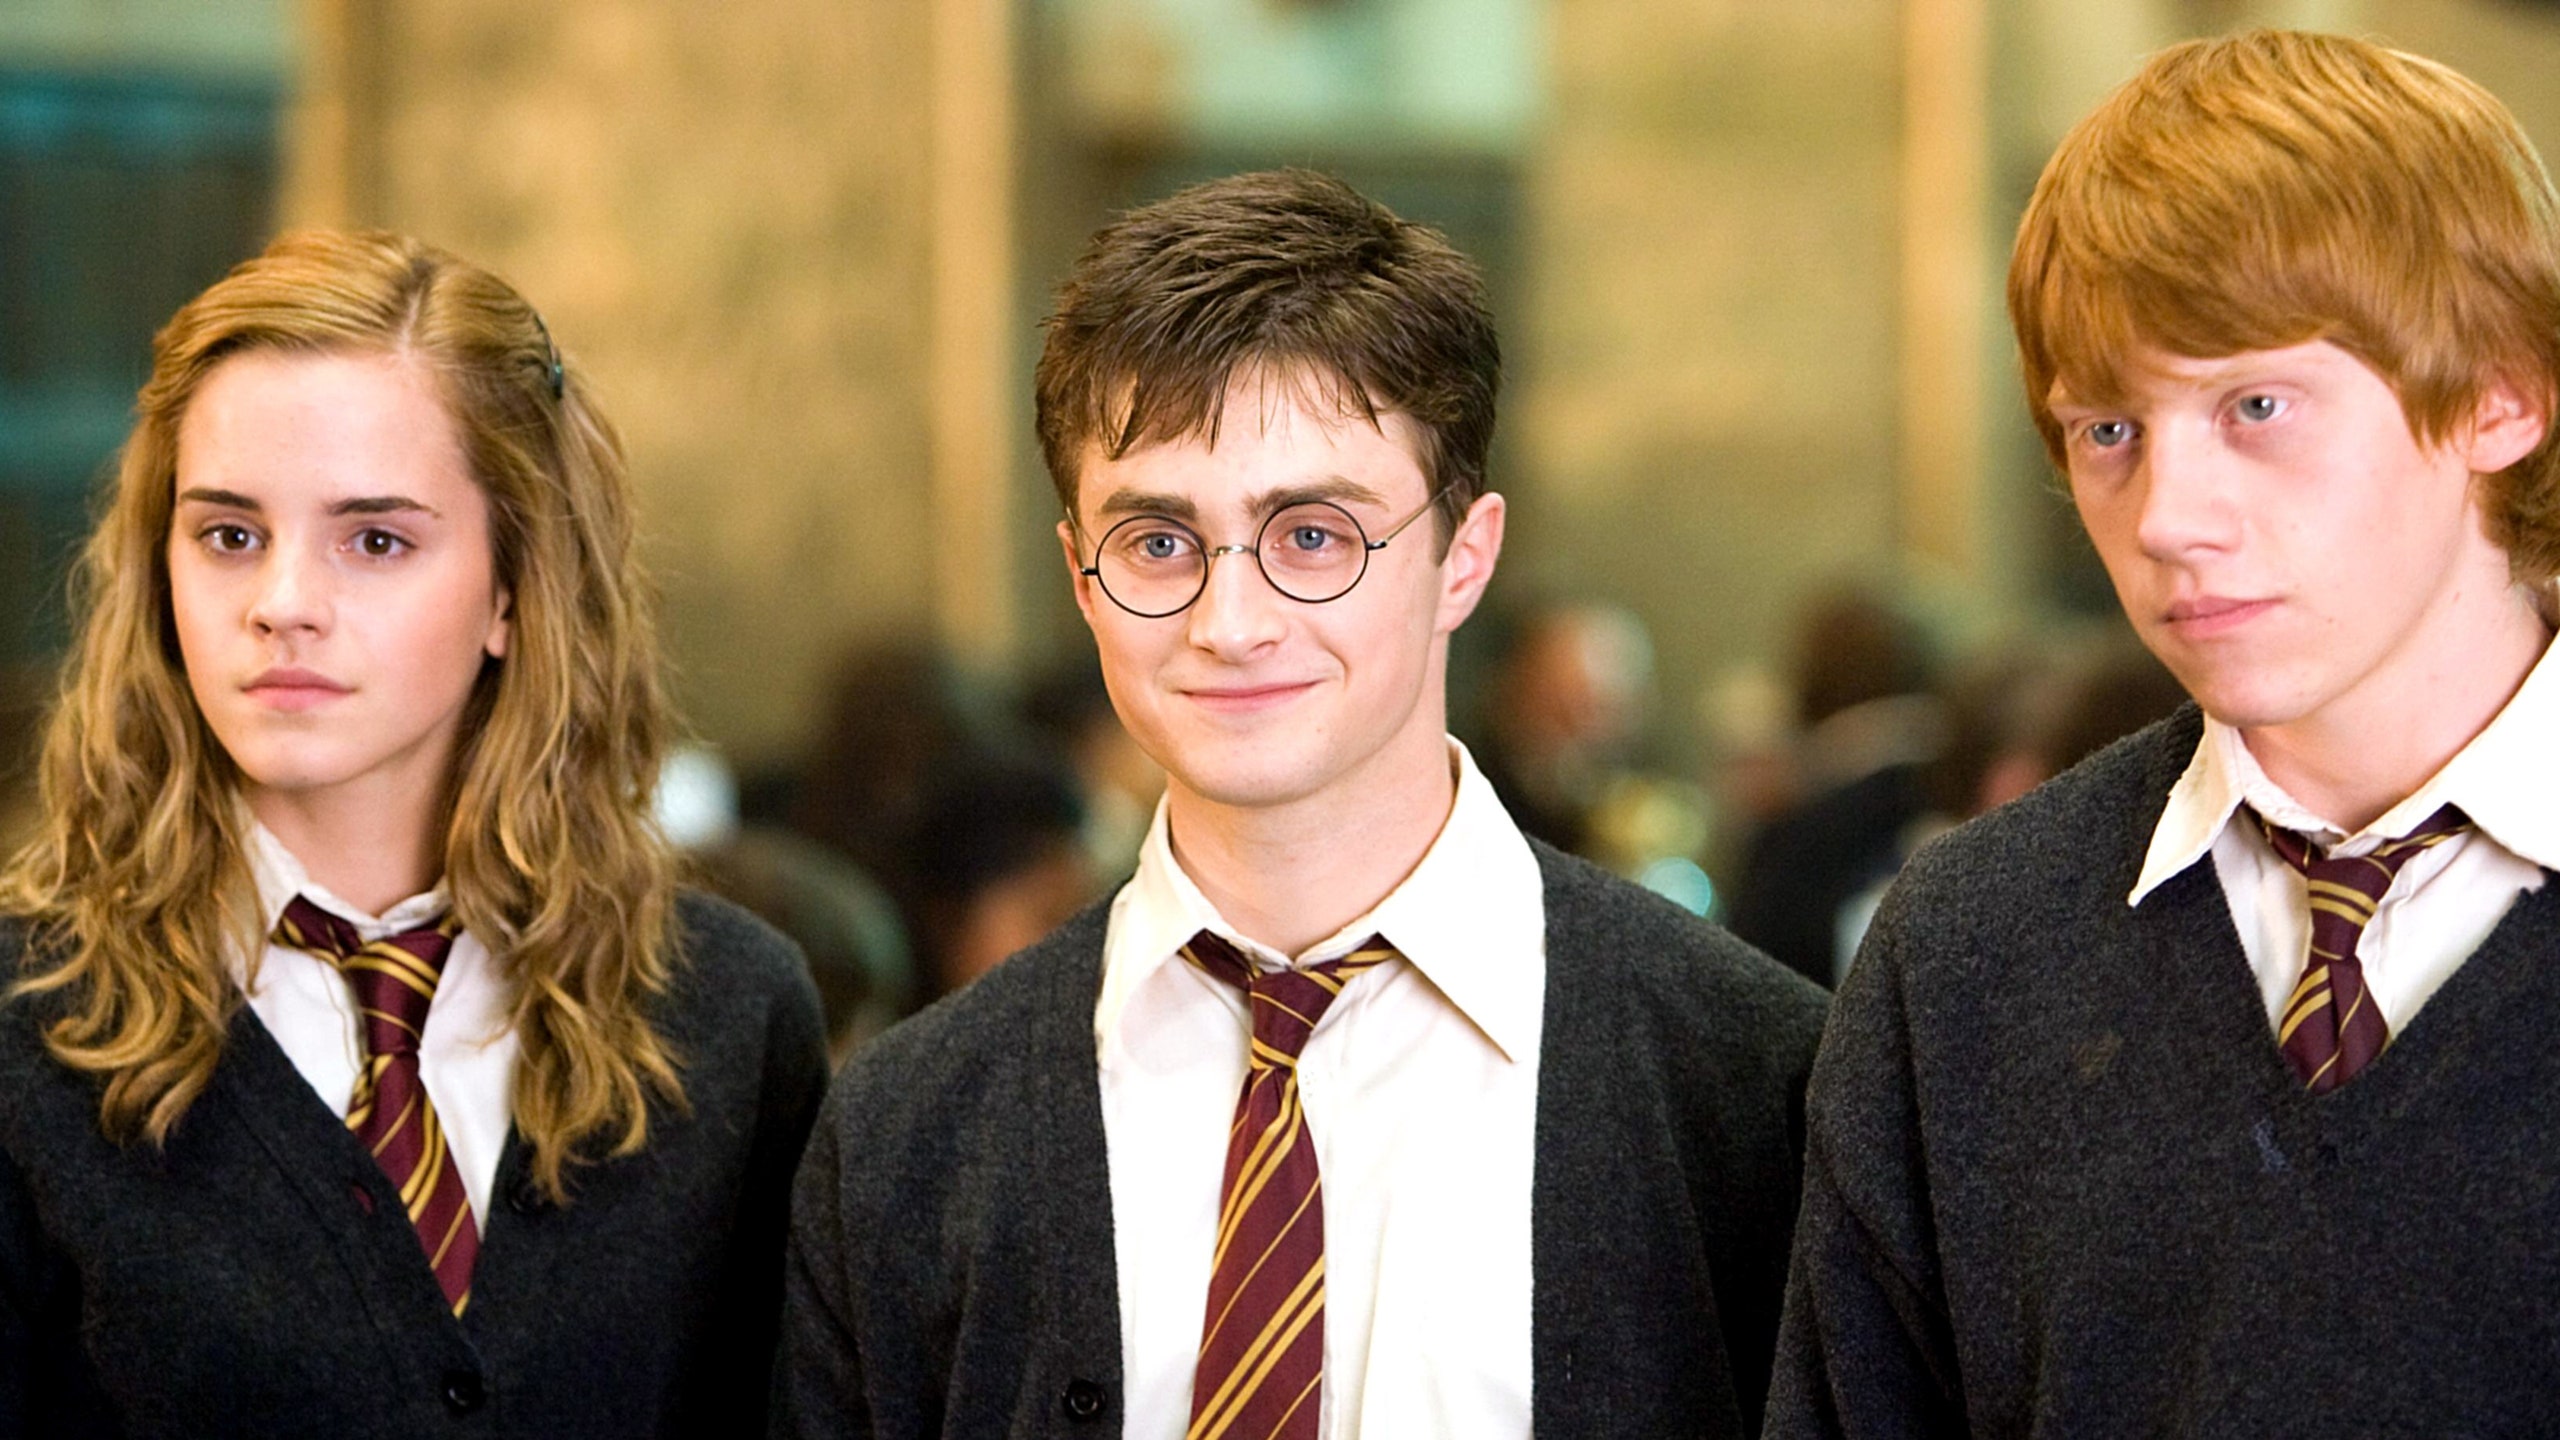 Watch the Moment Daniel Radcliffe Earned His Role in 'Harry Potter'